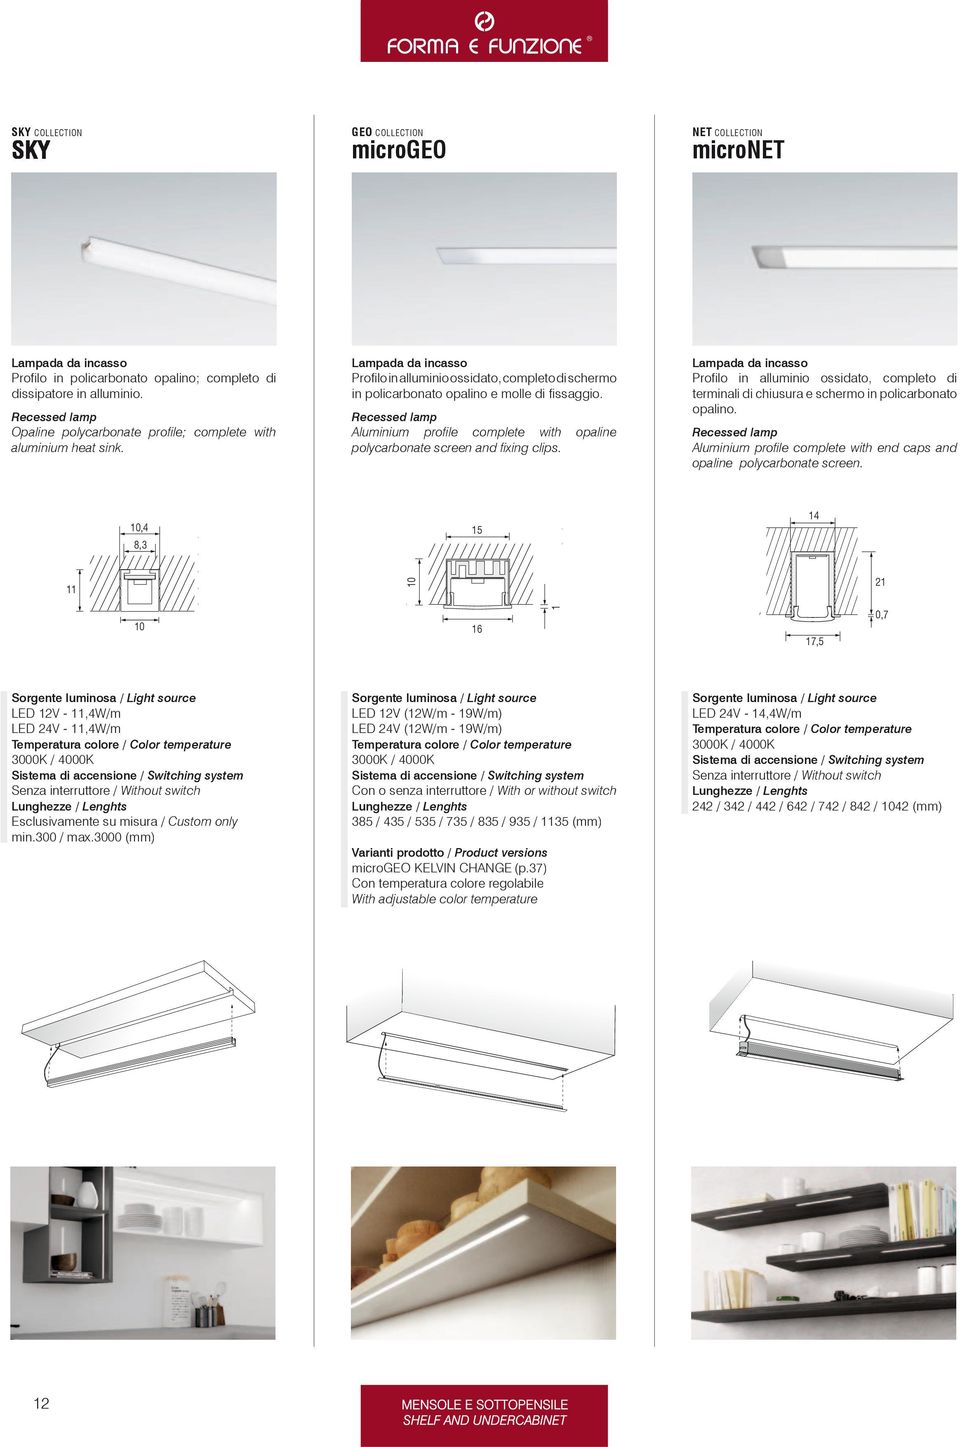 Recessed lamp Aluminium profile complete with opaline polycarbonate screen and fixing clips.